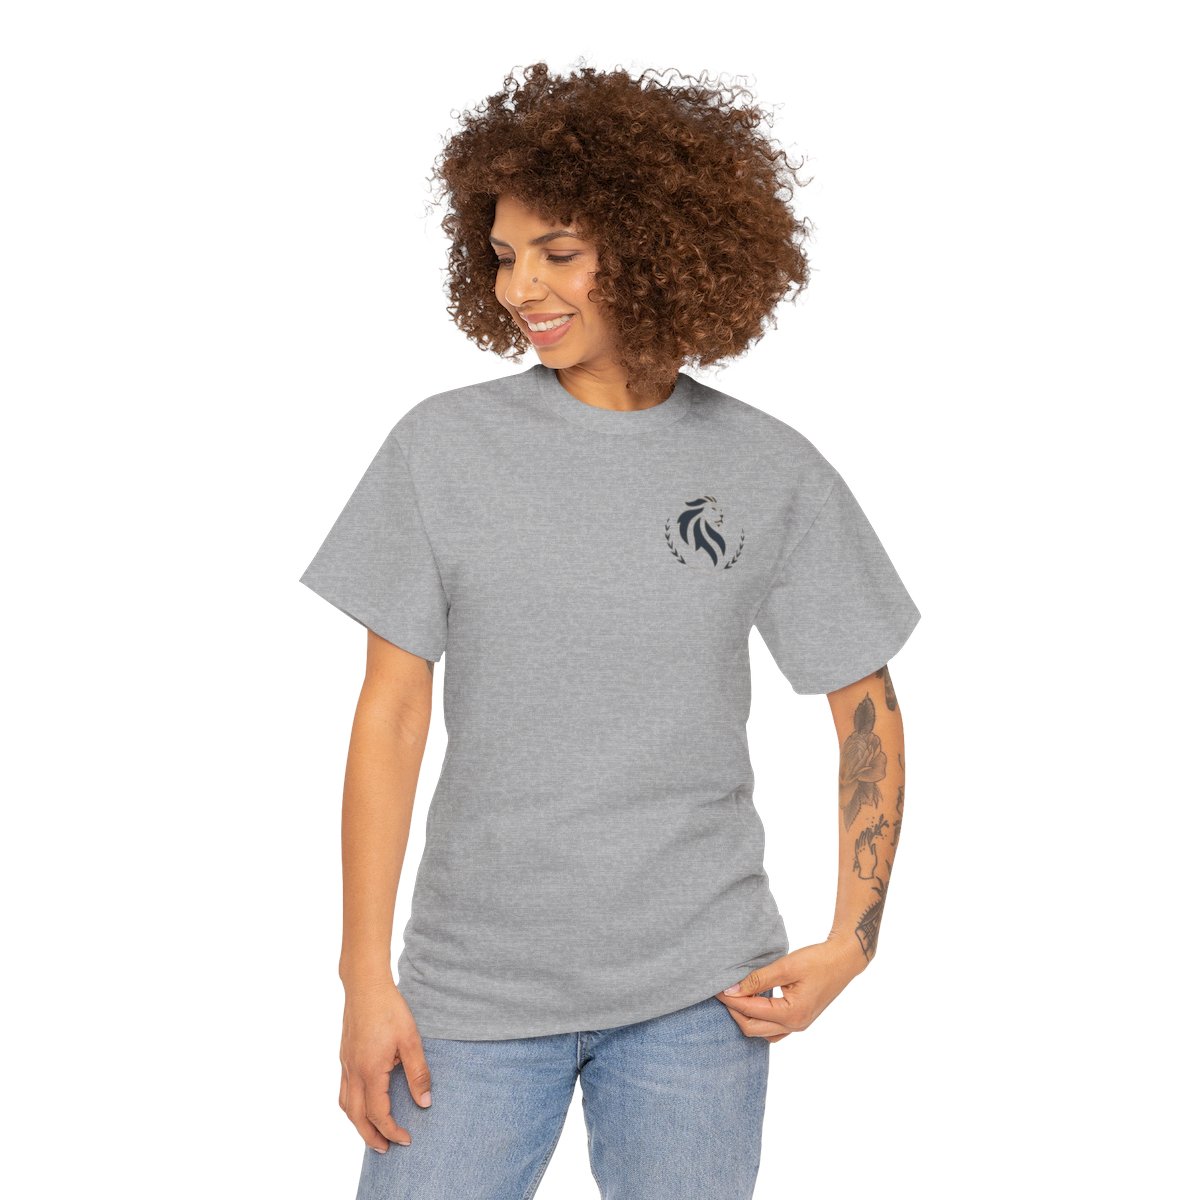 Lion  - Unisex Heavy Cotton Tee   "Roar with strength, lead with courage, and reign with wisdom." product thumbnail image